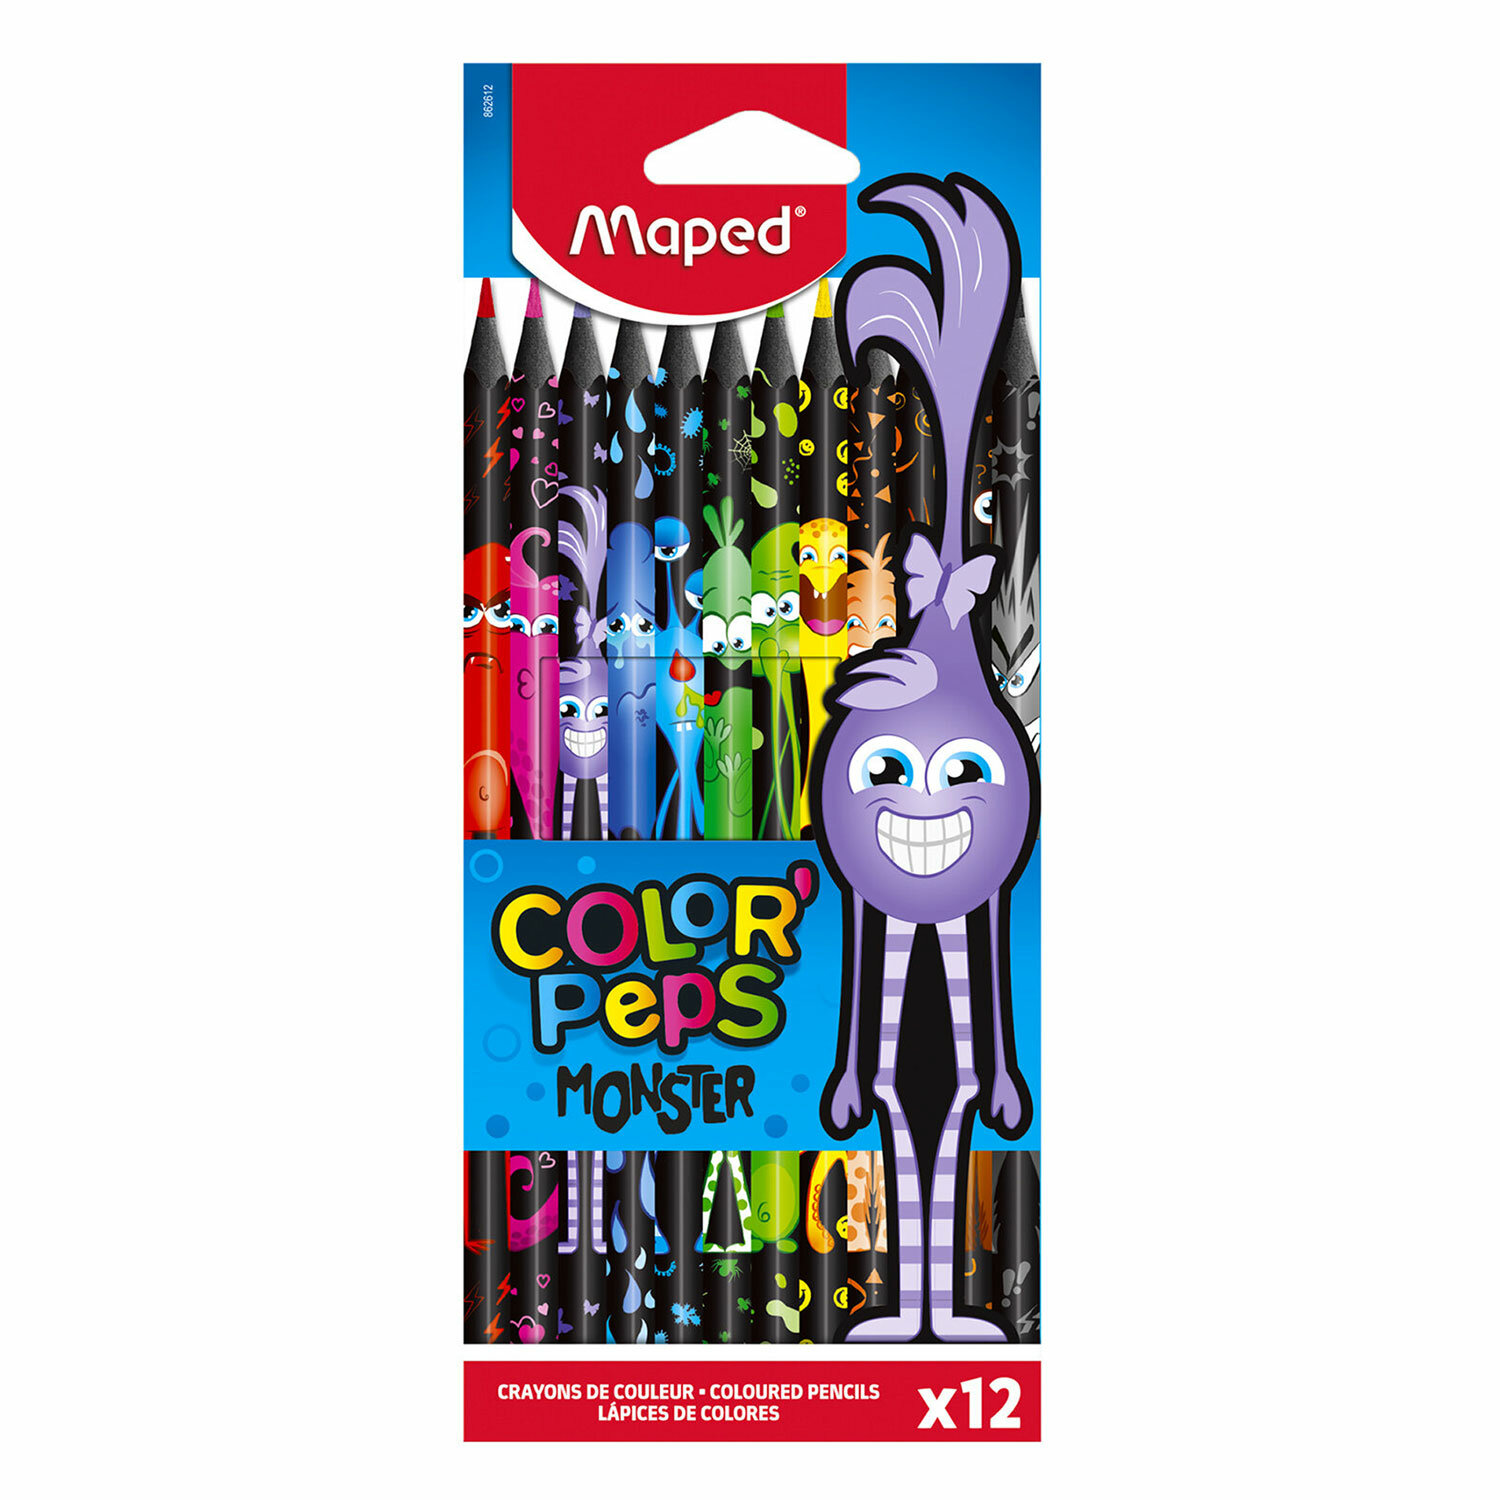   MAPED 862612 COLOR PEP'S Black Monster